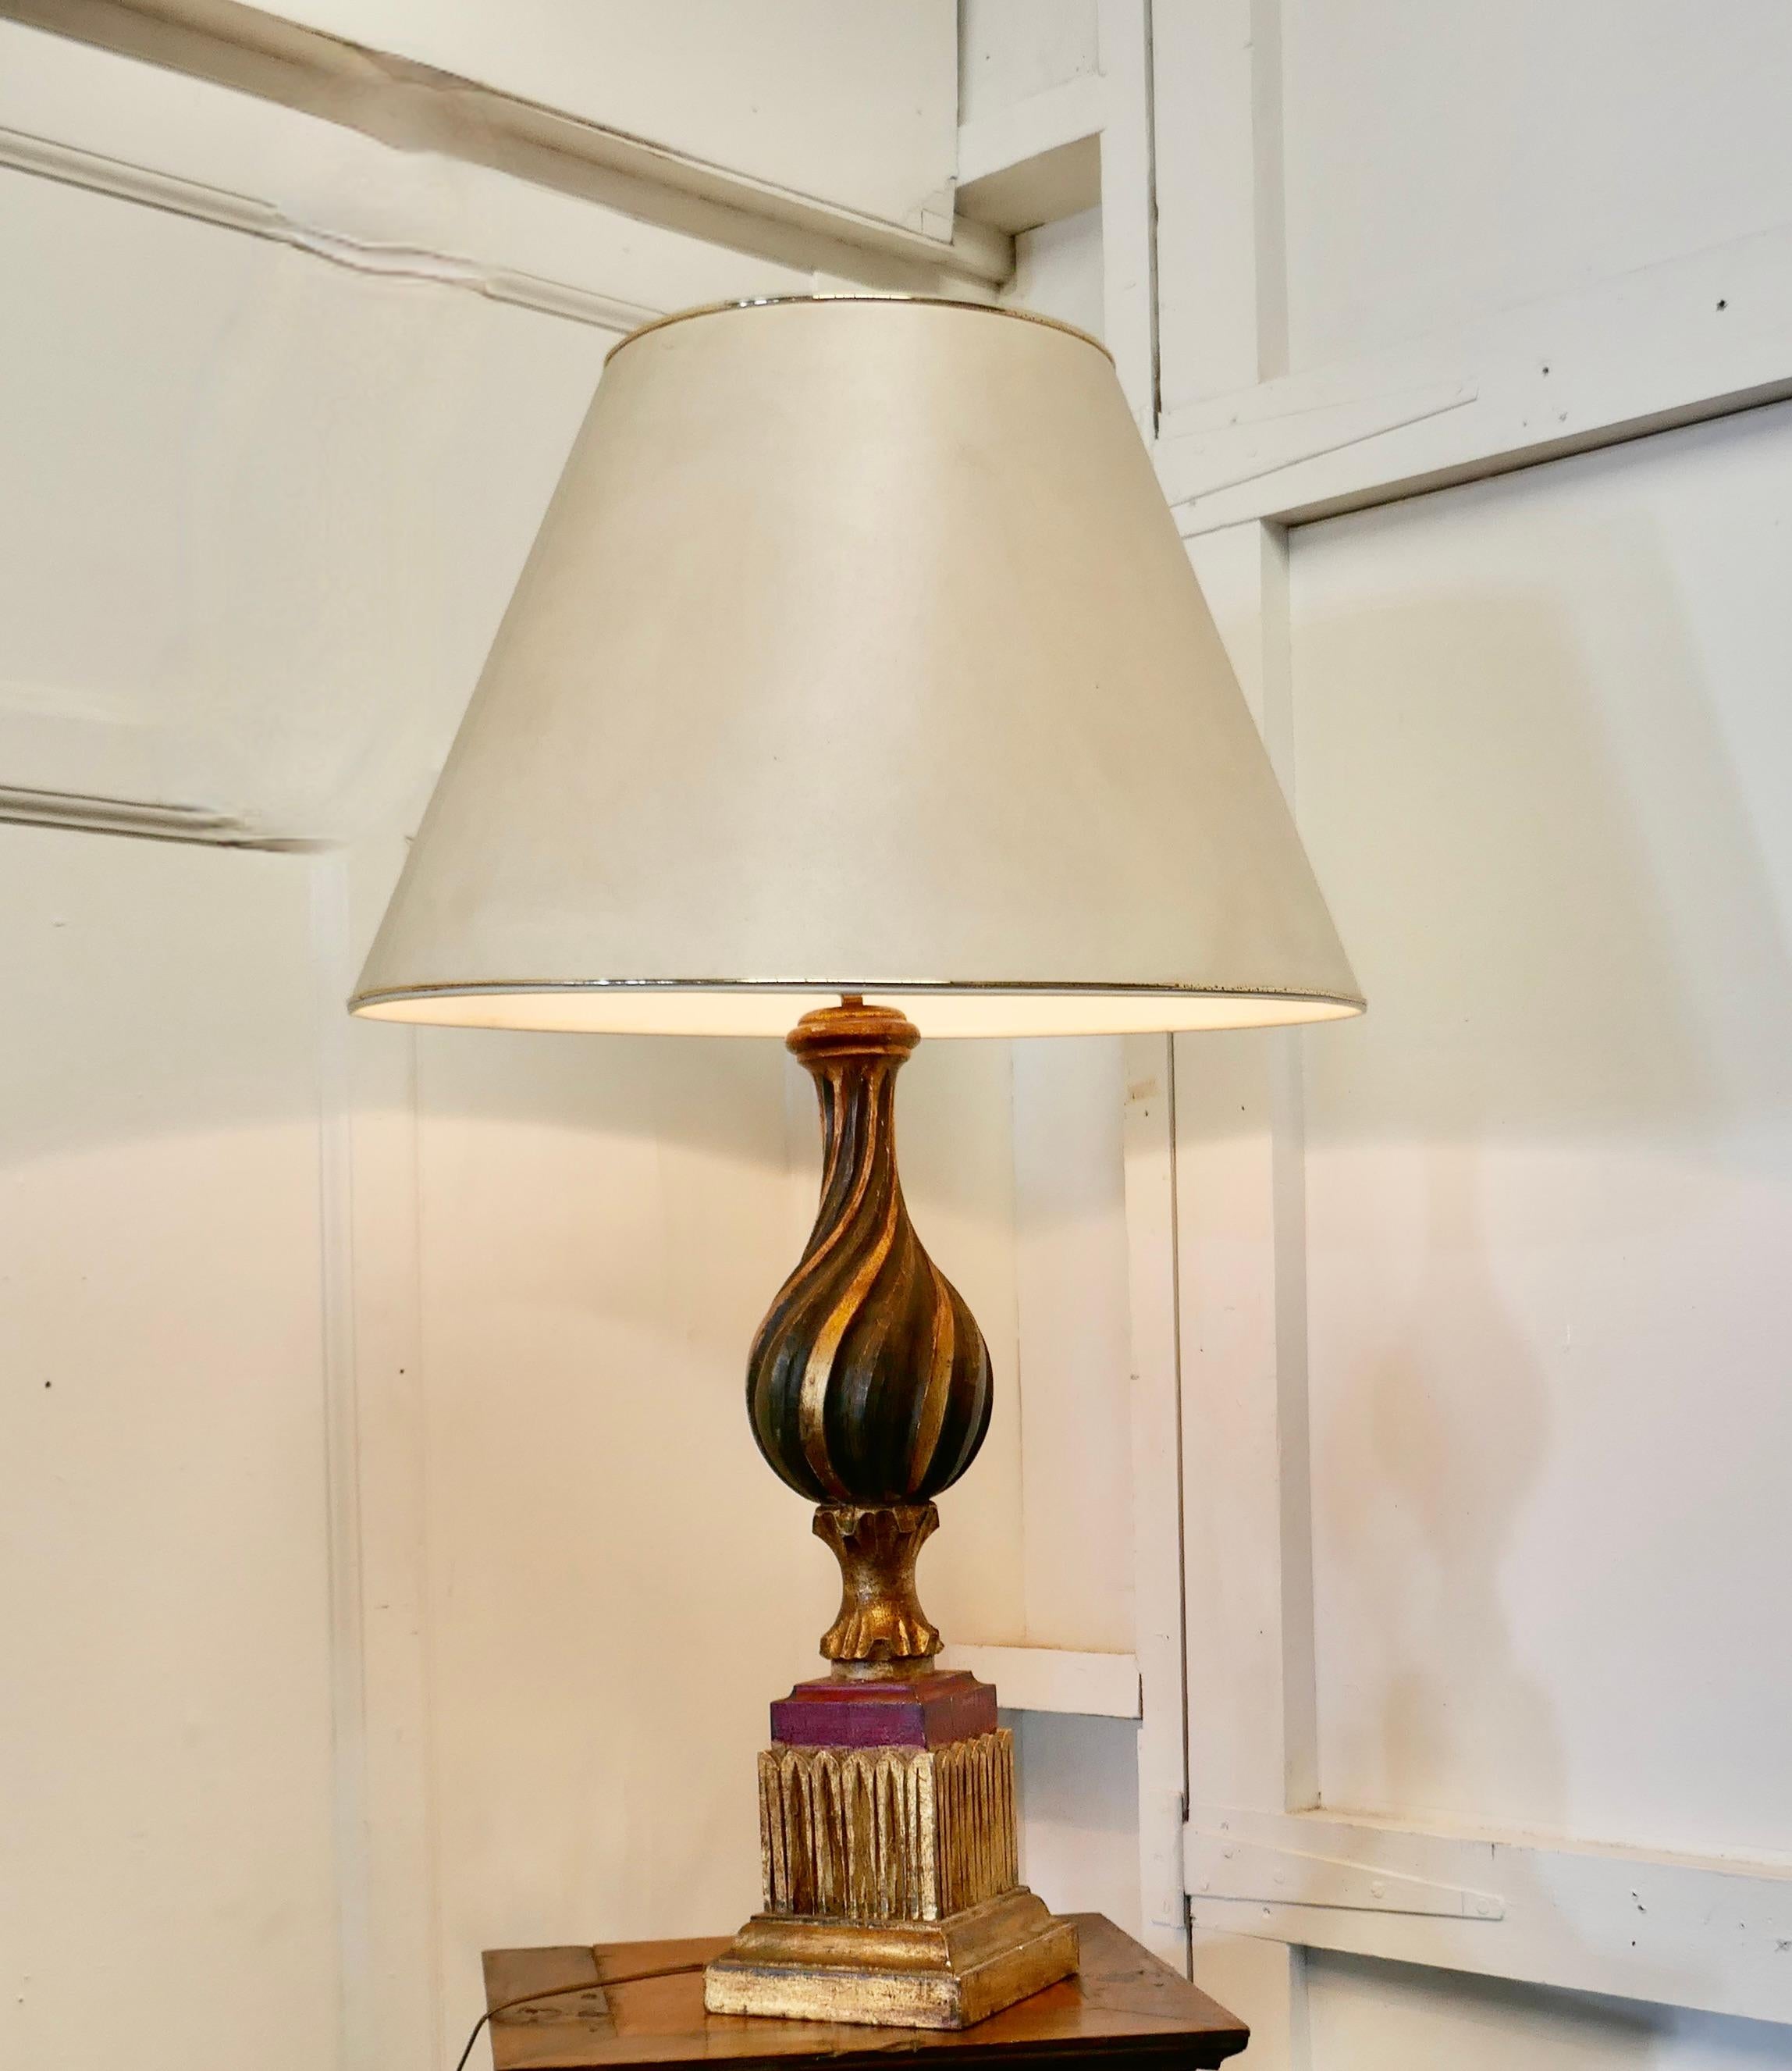 1920s Bulbous Folk Art painted Spanish lamp and shade

This an attractive painted lamp, the lamp has a hand carved bulbous Fair Ground Twisted column which is painted in Gold, Green and Red, the paint has now aged in colour and developed a